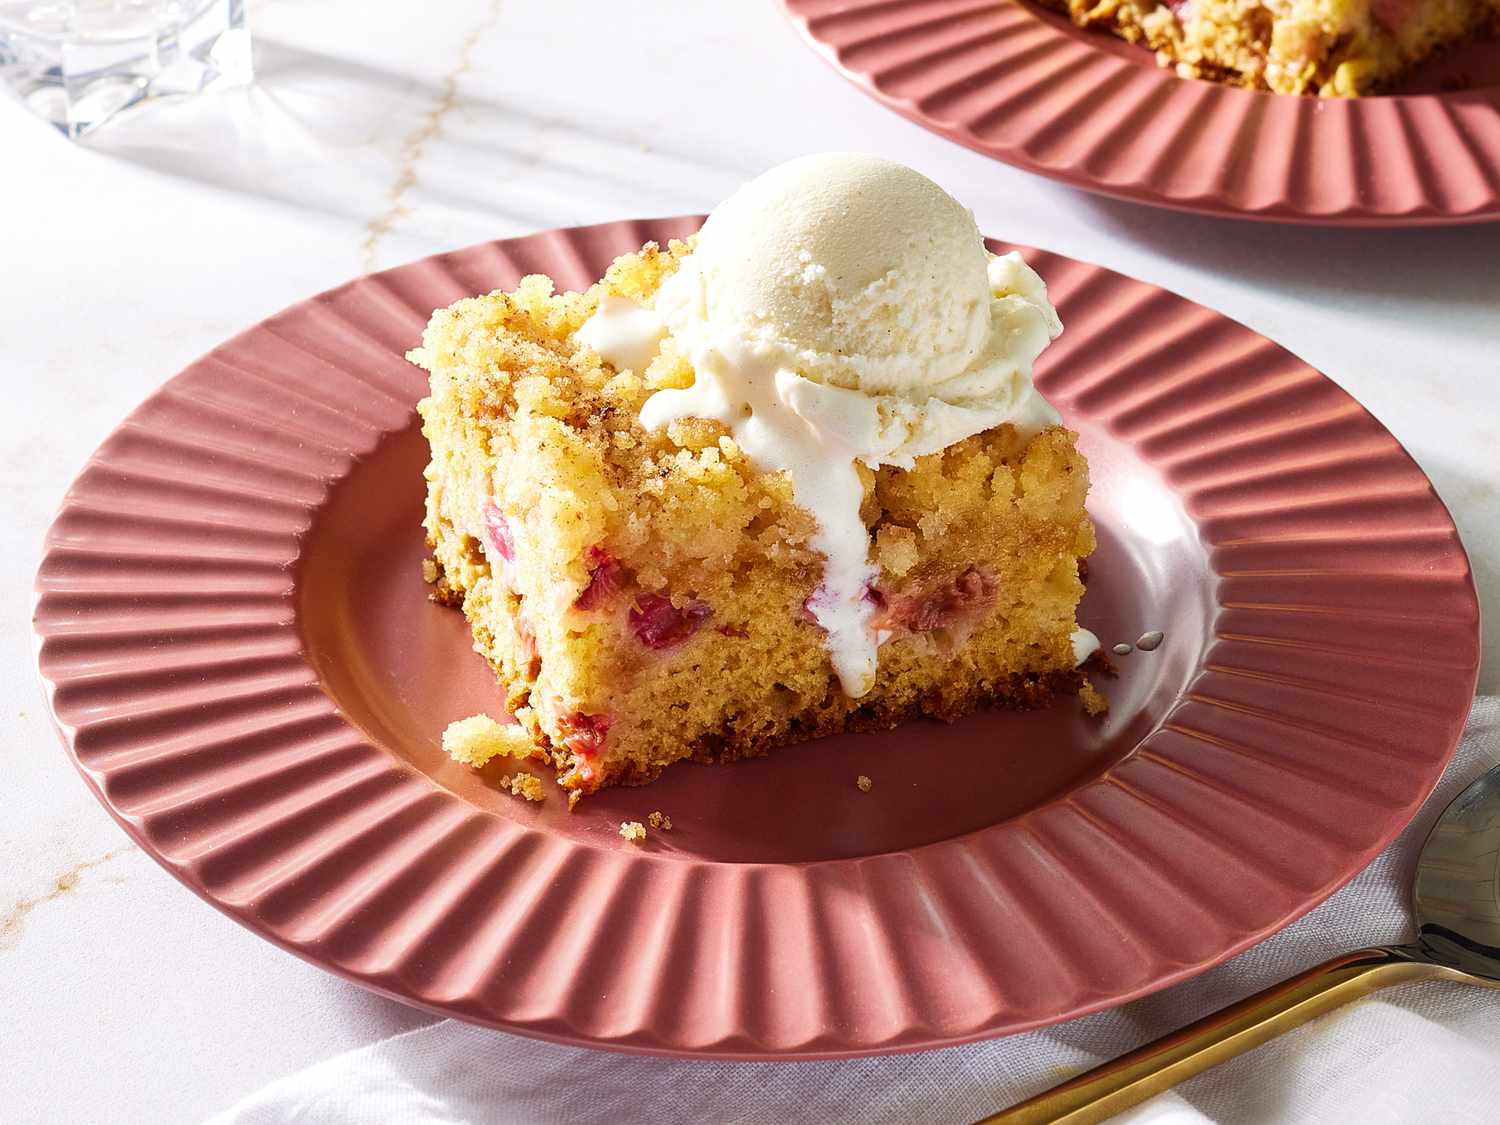 Aunt Kaye's Rhubarb Dump Cake Recipe: A Sweet and Tart Delight with Nutritional Benefits